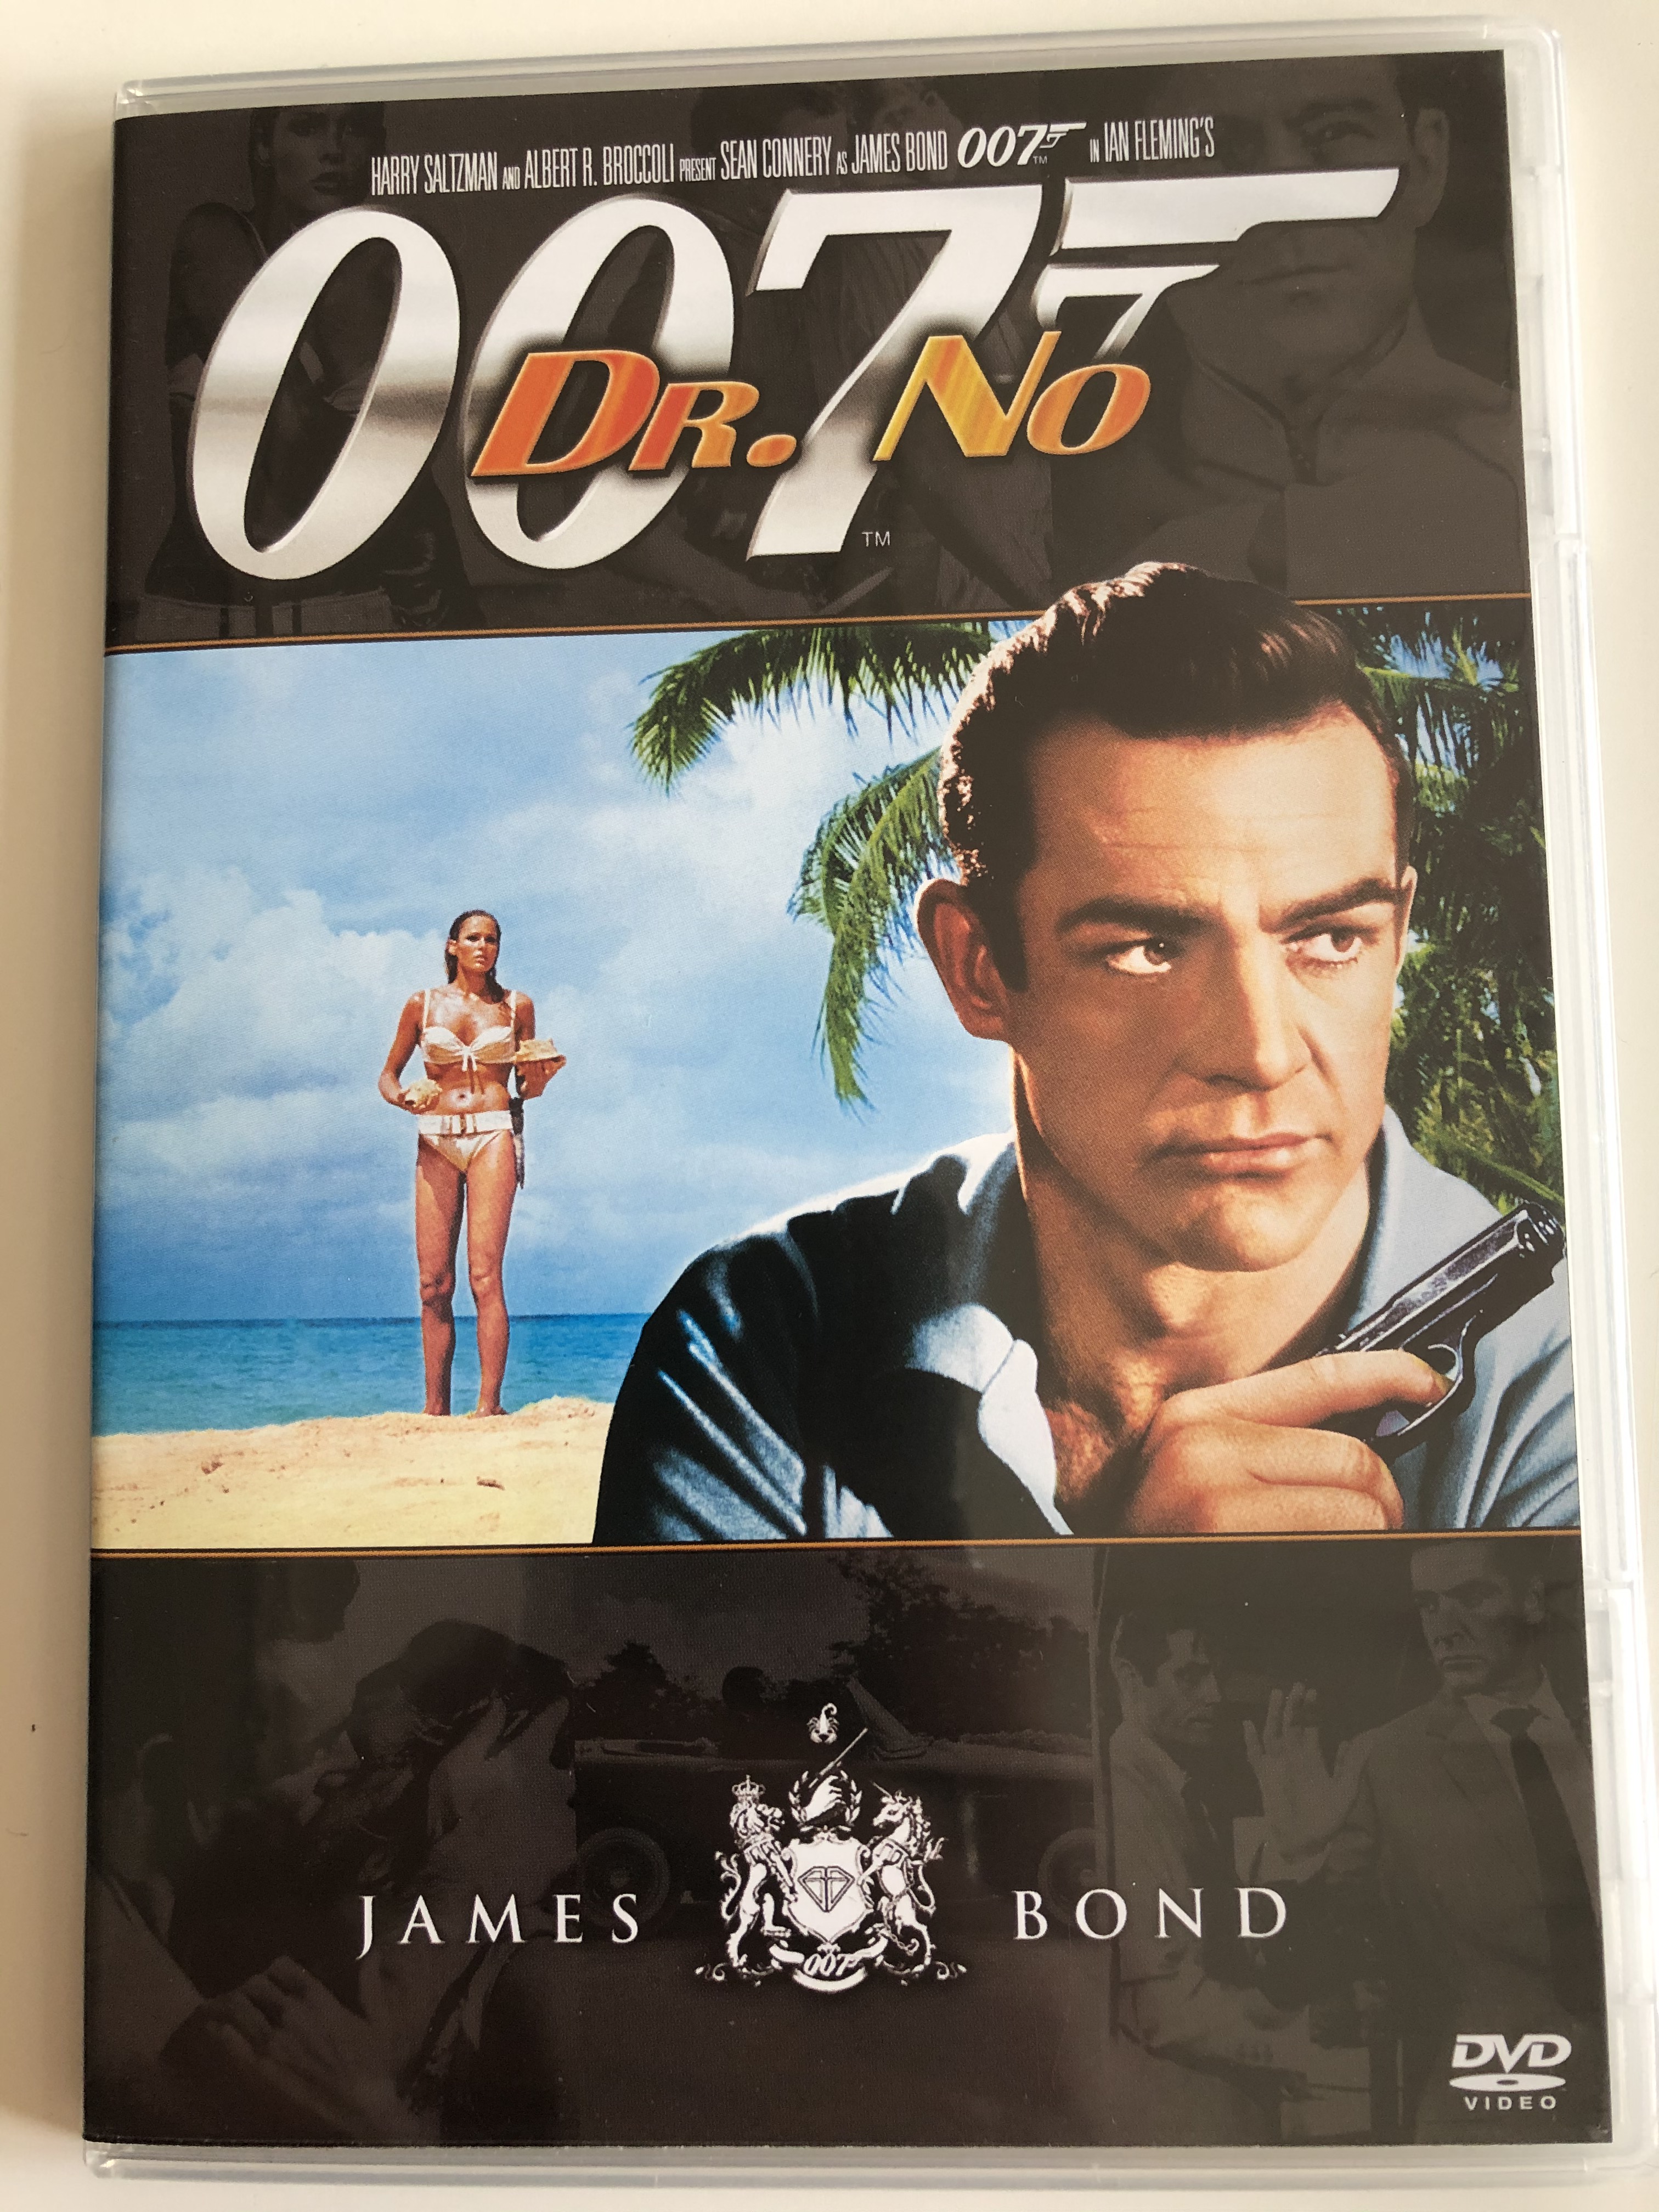 James Bond 007 - Dr. No DVD 1962 Dr. No / Directed by Terence Young /  Starring: Sean Connery, Ursula Andress, Joseph Wiseman, Jack Lord - Bible  in My Language